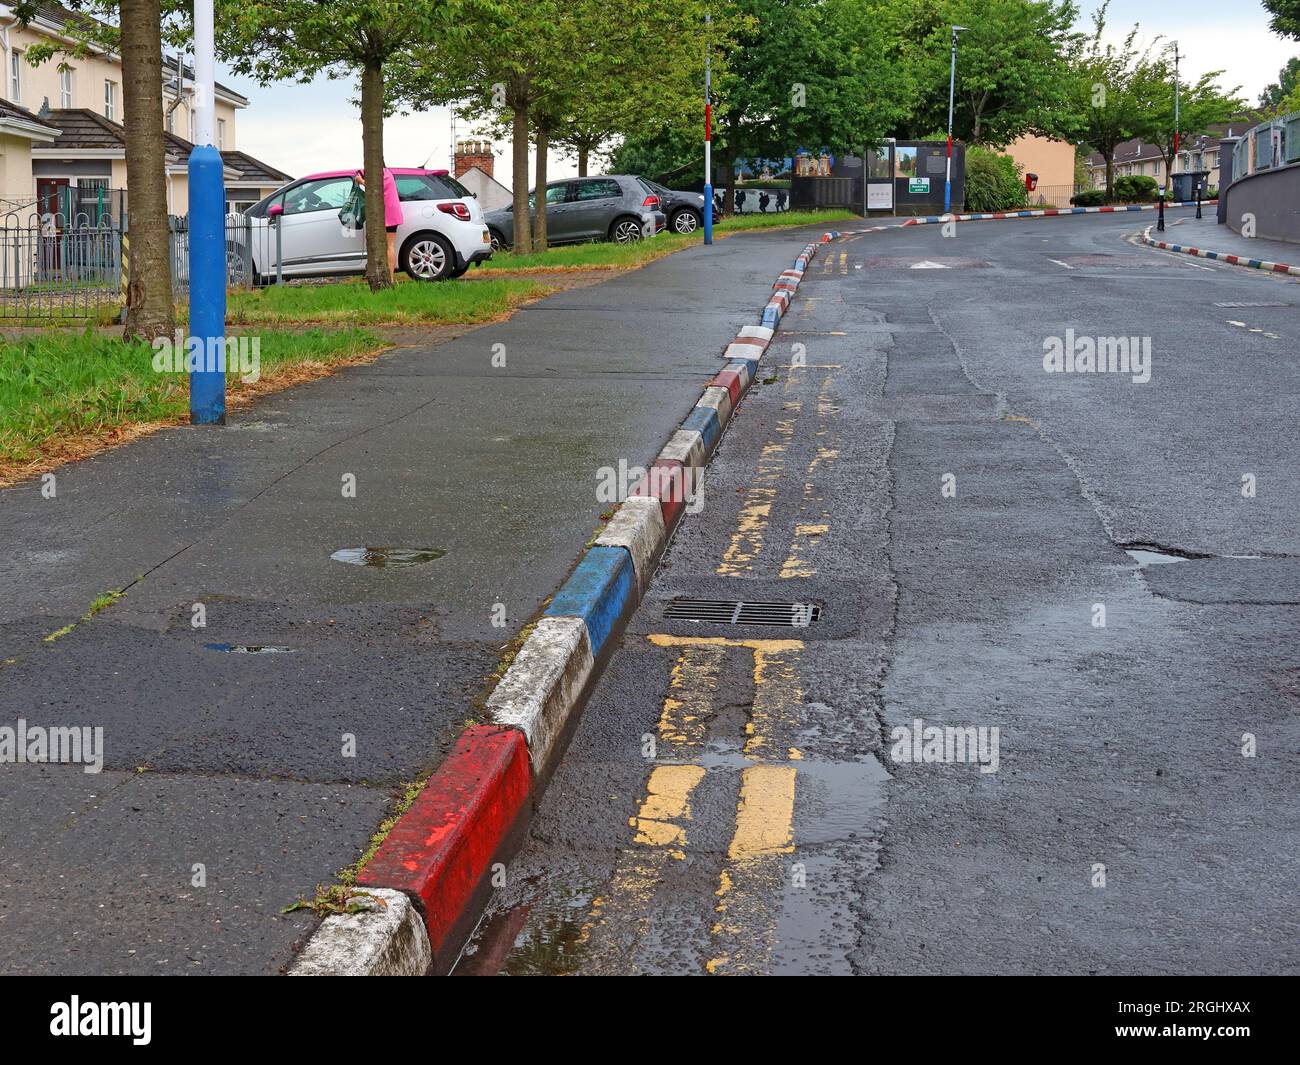 Unionist Kerbstones, red, white & blue of the union jack, Protestant area of The Fountain, Londonderry, Northern Ireland, UK, BT48 6QH Stock Photo